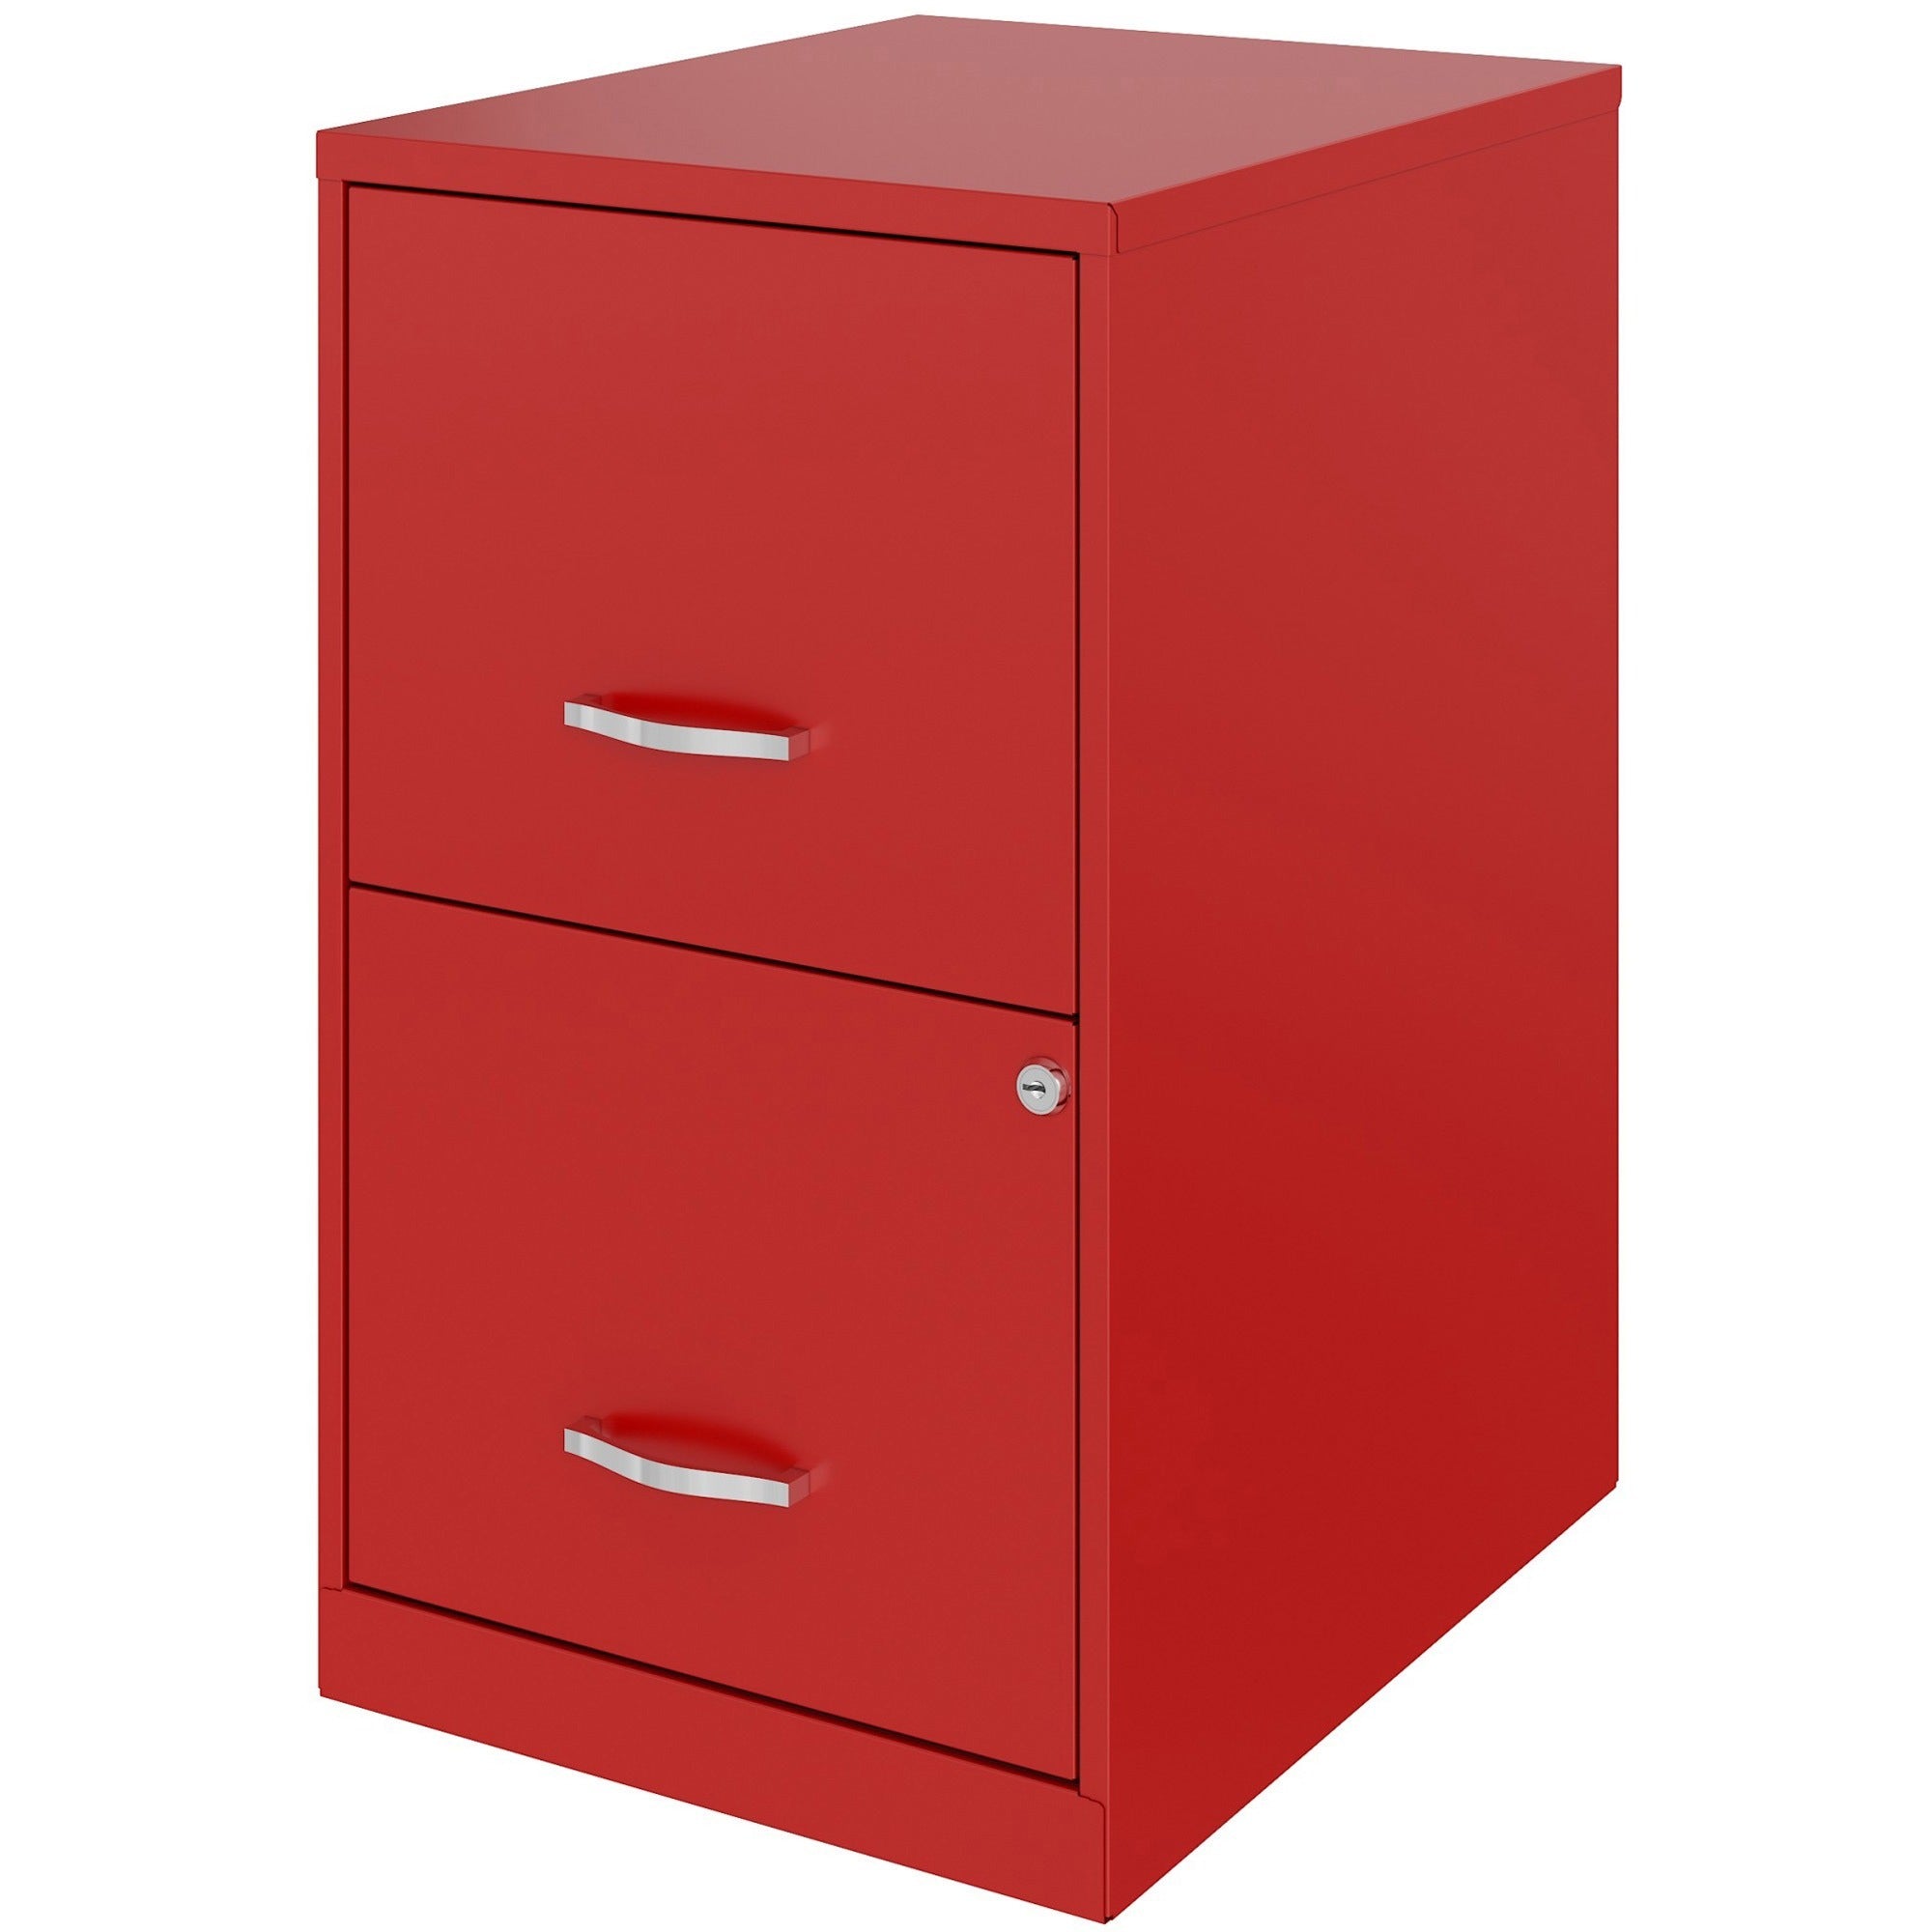 nusparc-file-cabinet-142-x-18-x-245-2-x-drawers-for-file-letter-vertical-locking-drawer-glide-suspension-nonporous-surface-red-baked-enamel-steel-recycled_nprvf218aard - 3